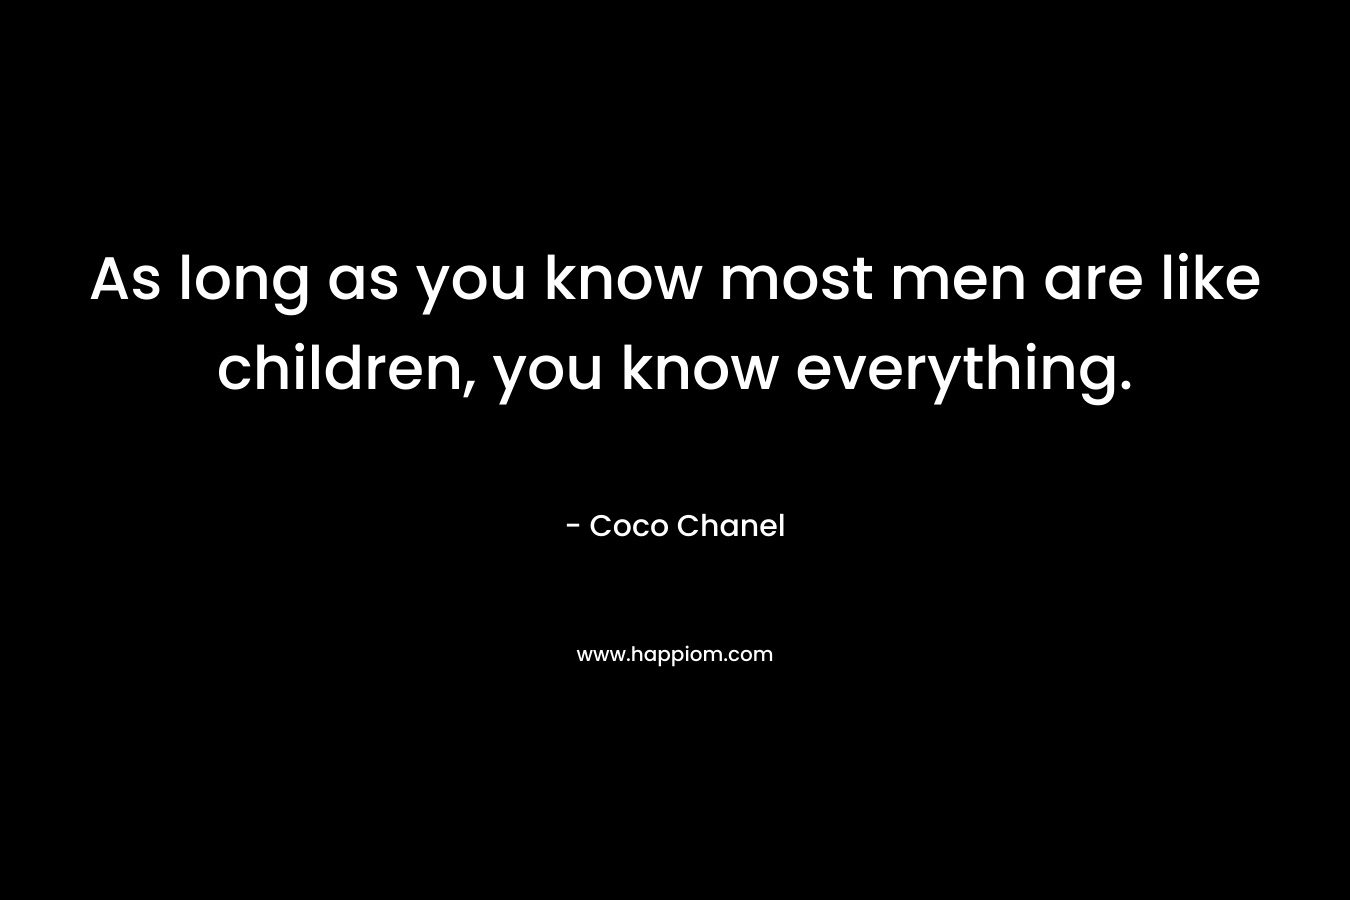 As long as you know most men are like children, you know everything.